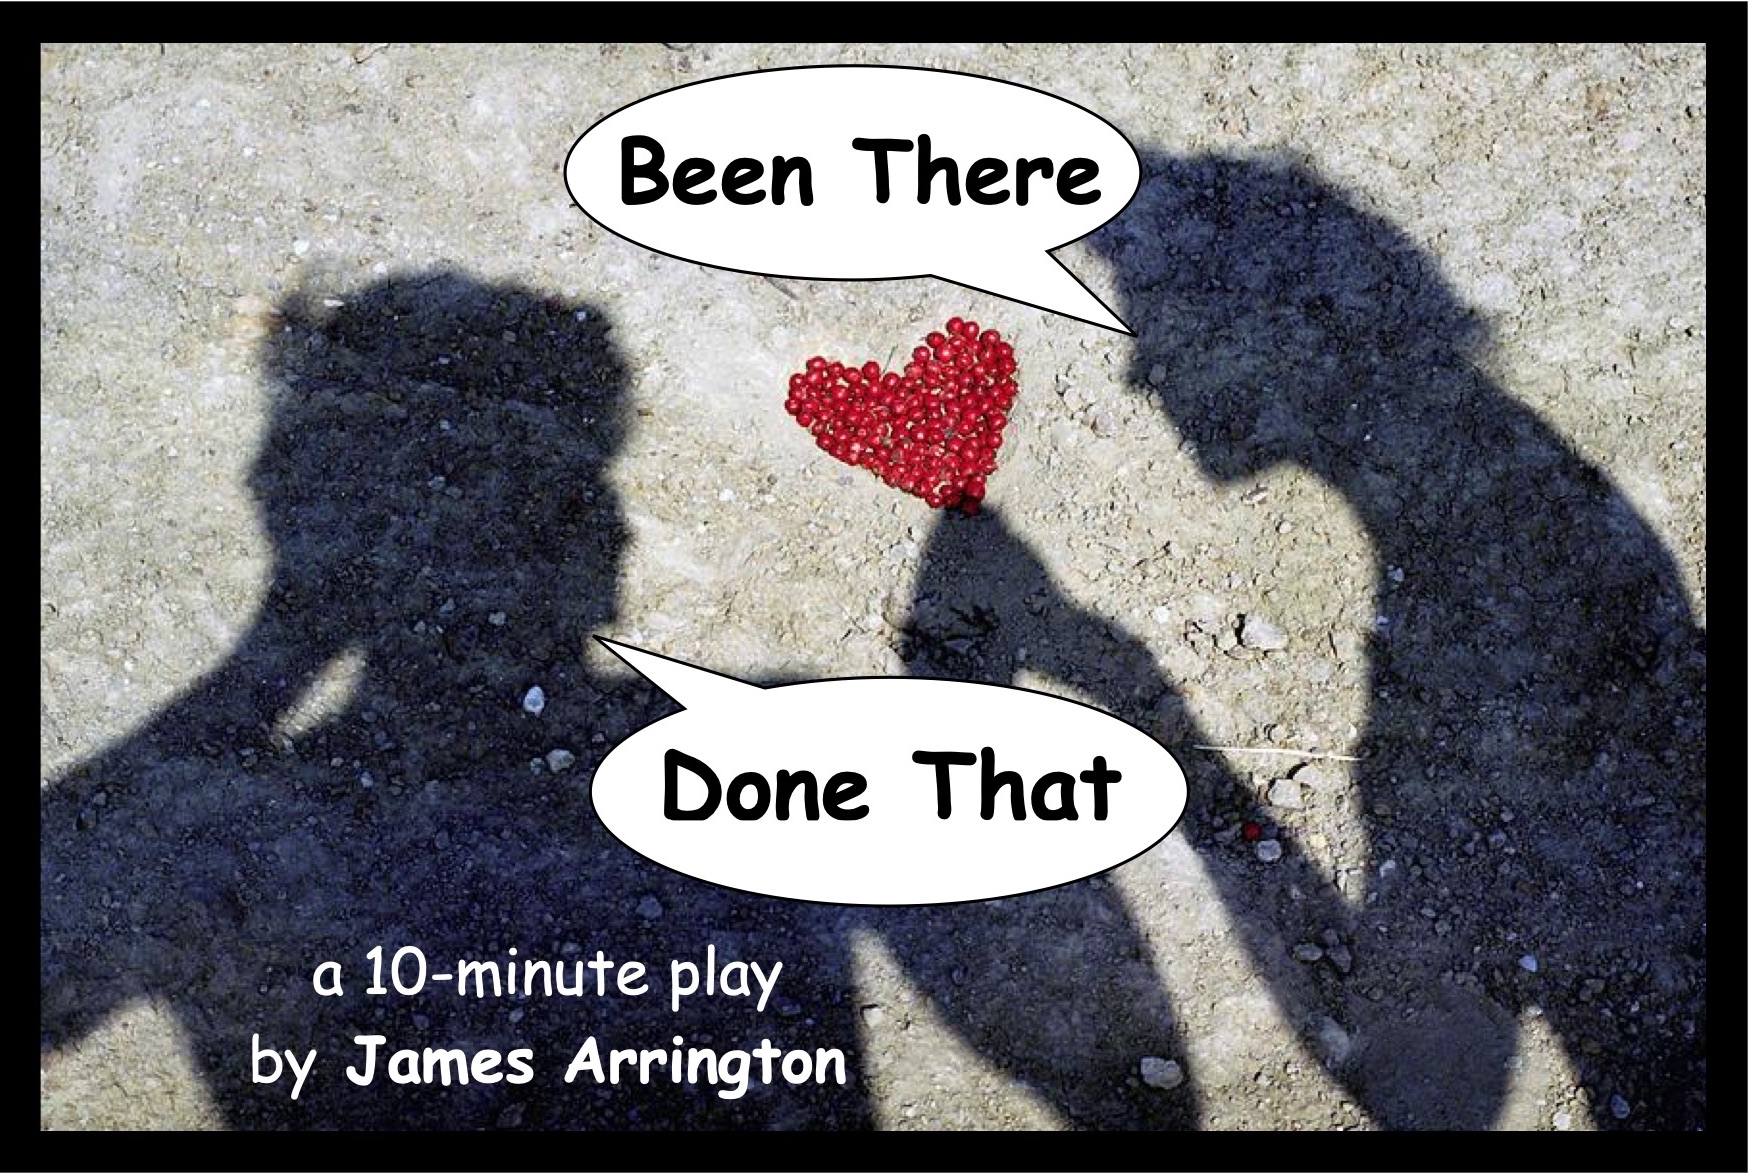 Been There, Done That • a 10-minute play